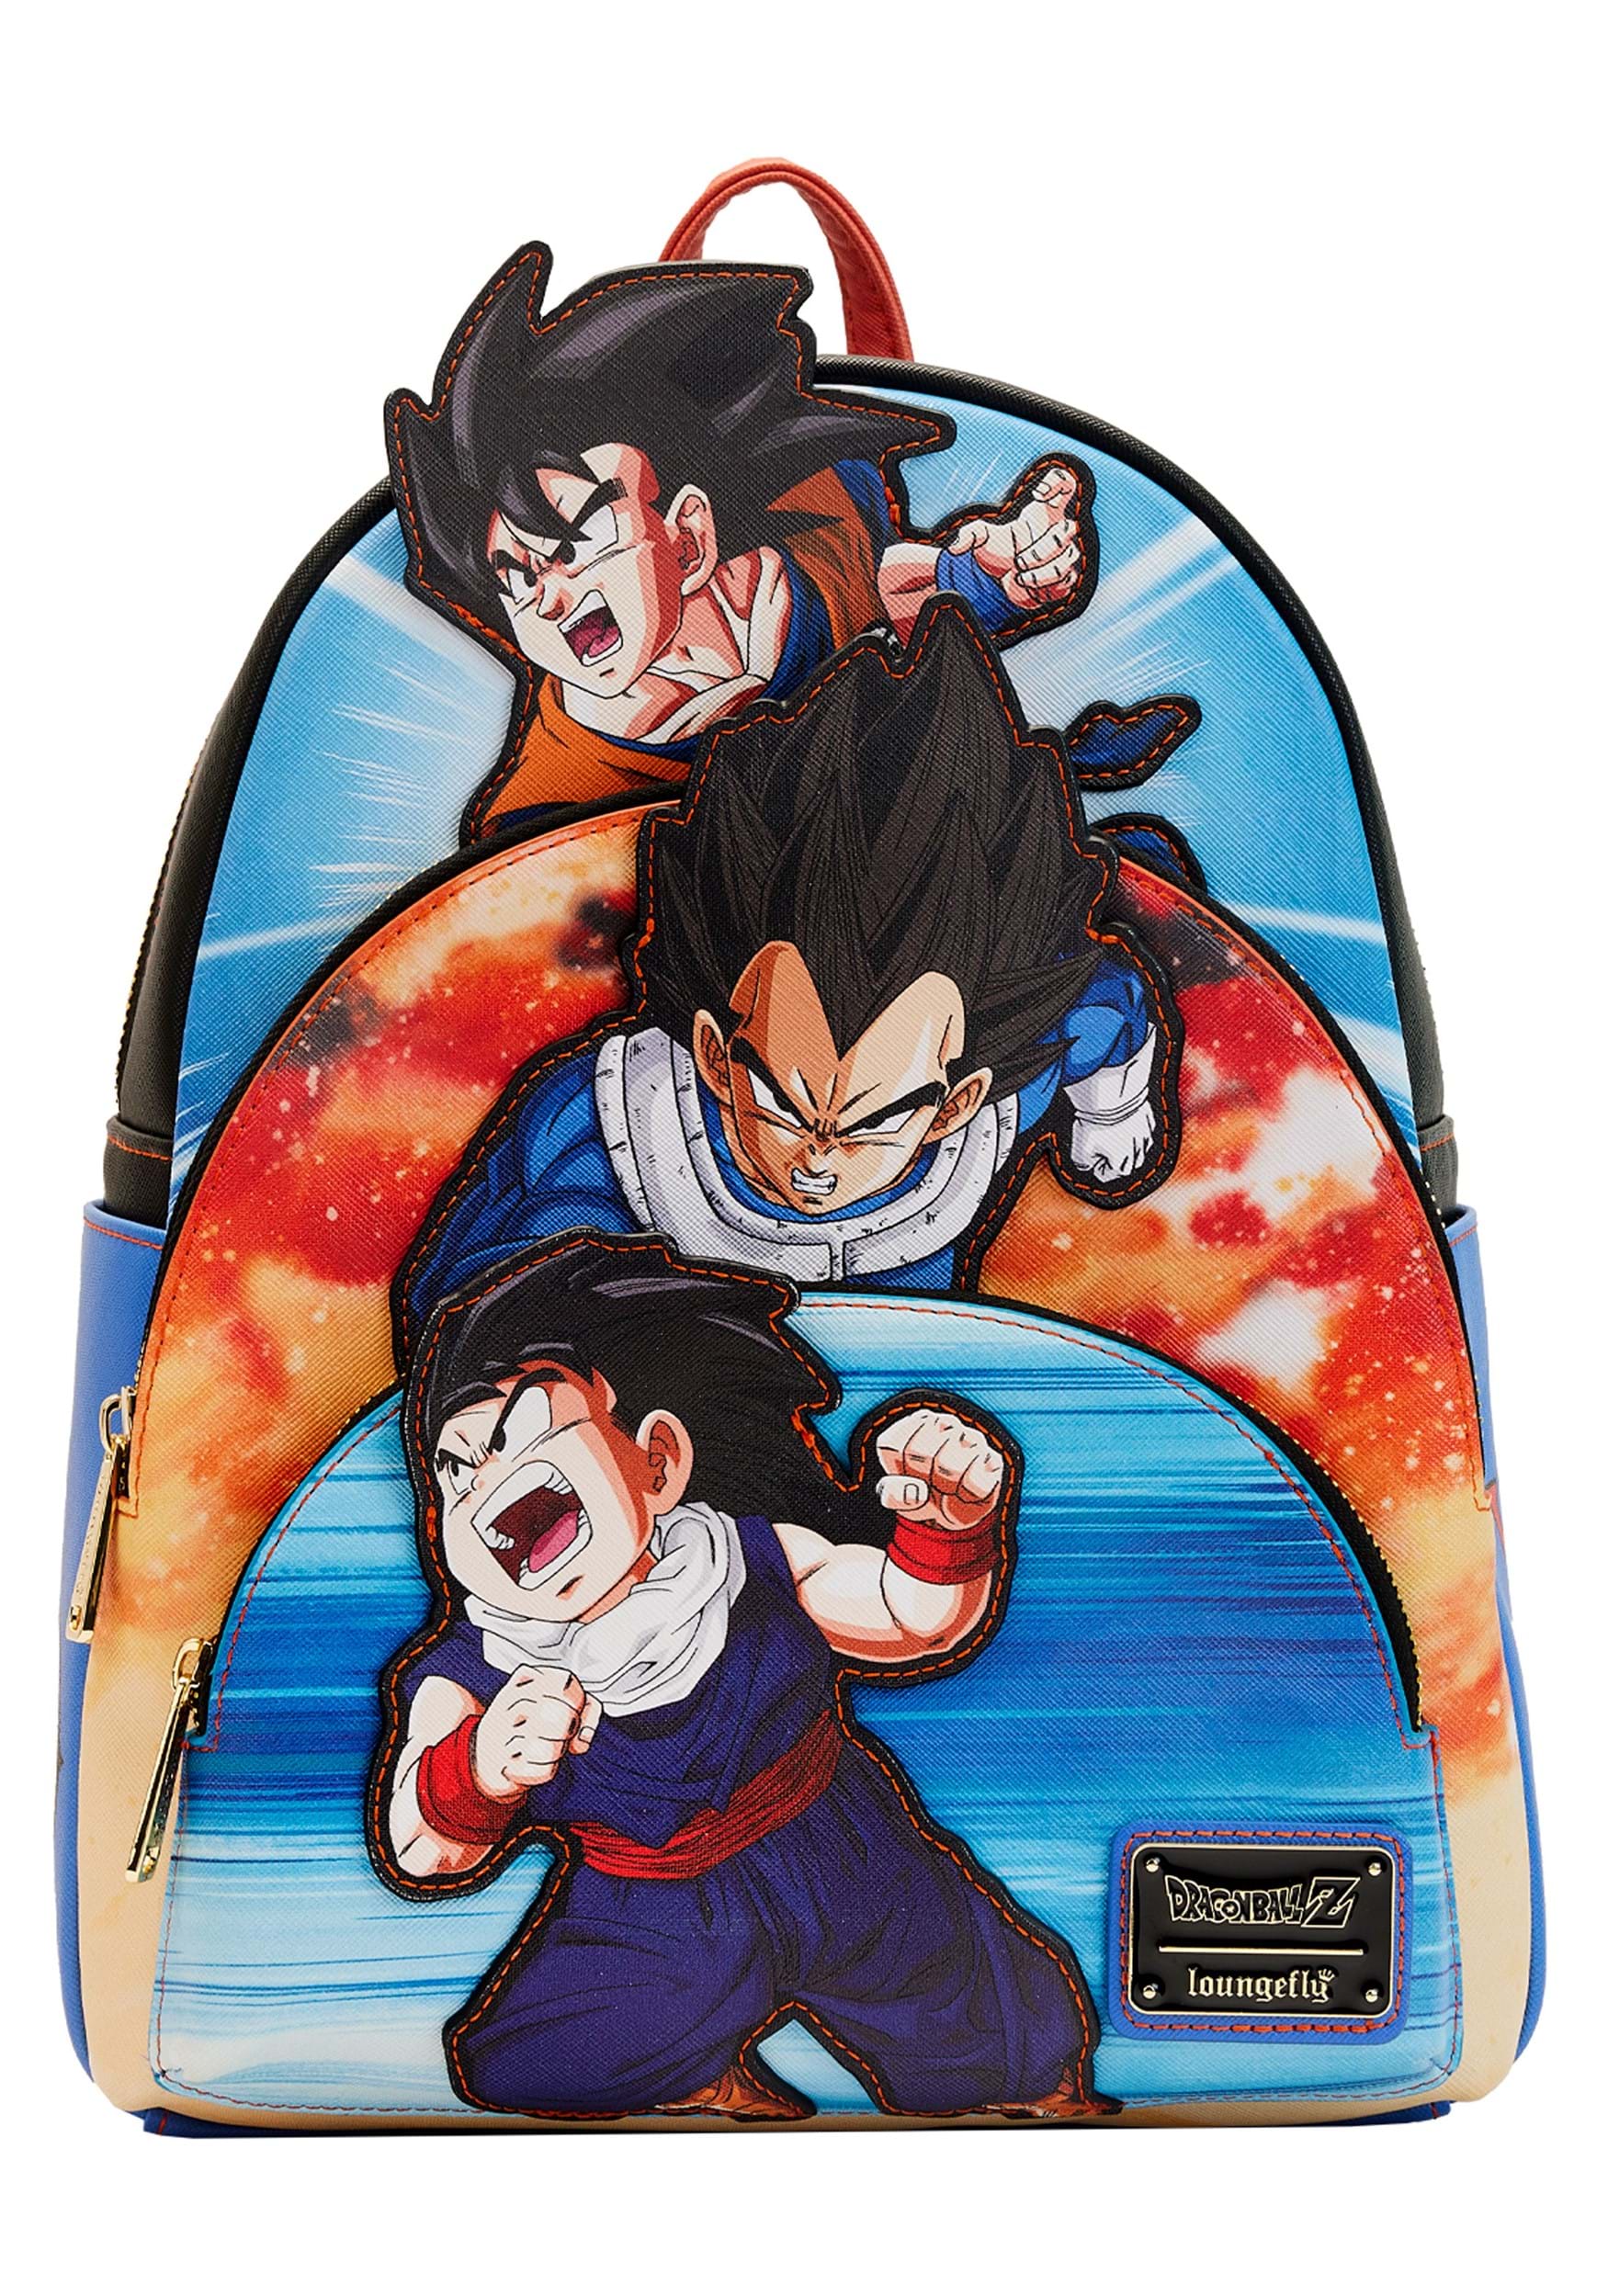 Dragon Ball Z Triple Pocket Backpack by Loungefly